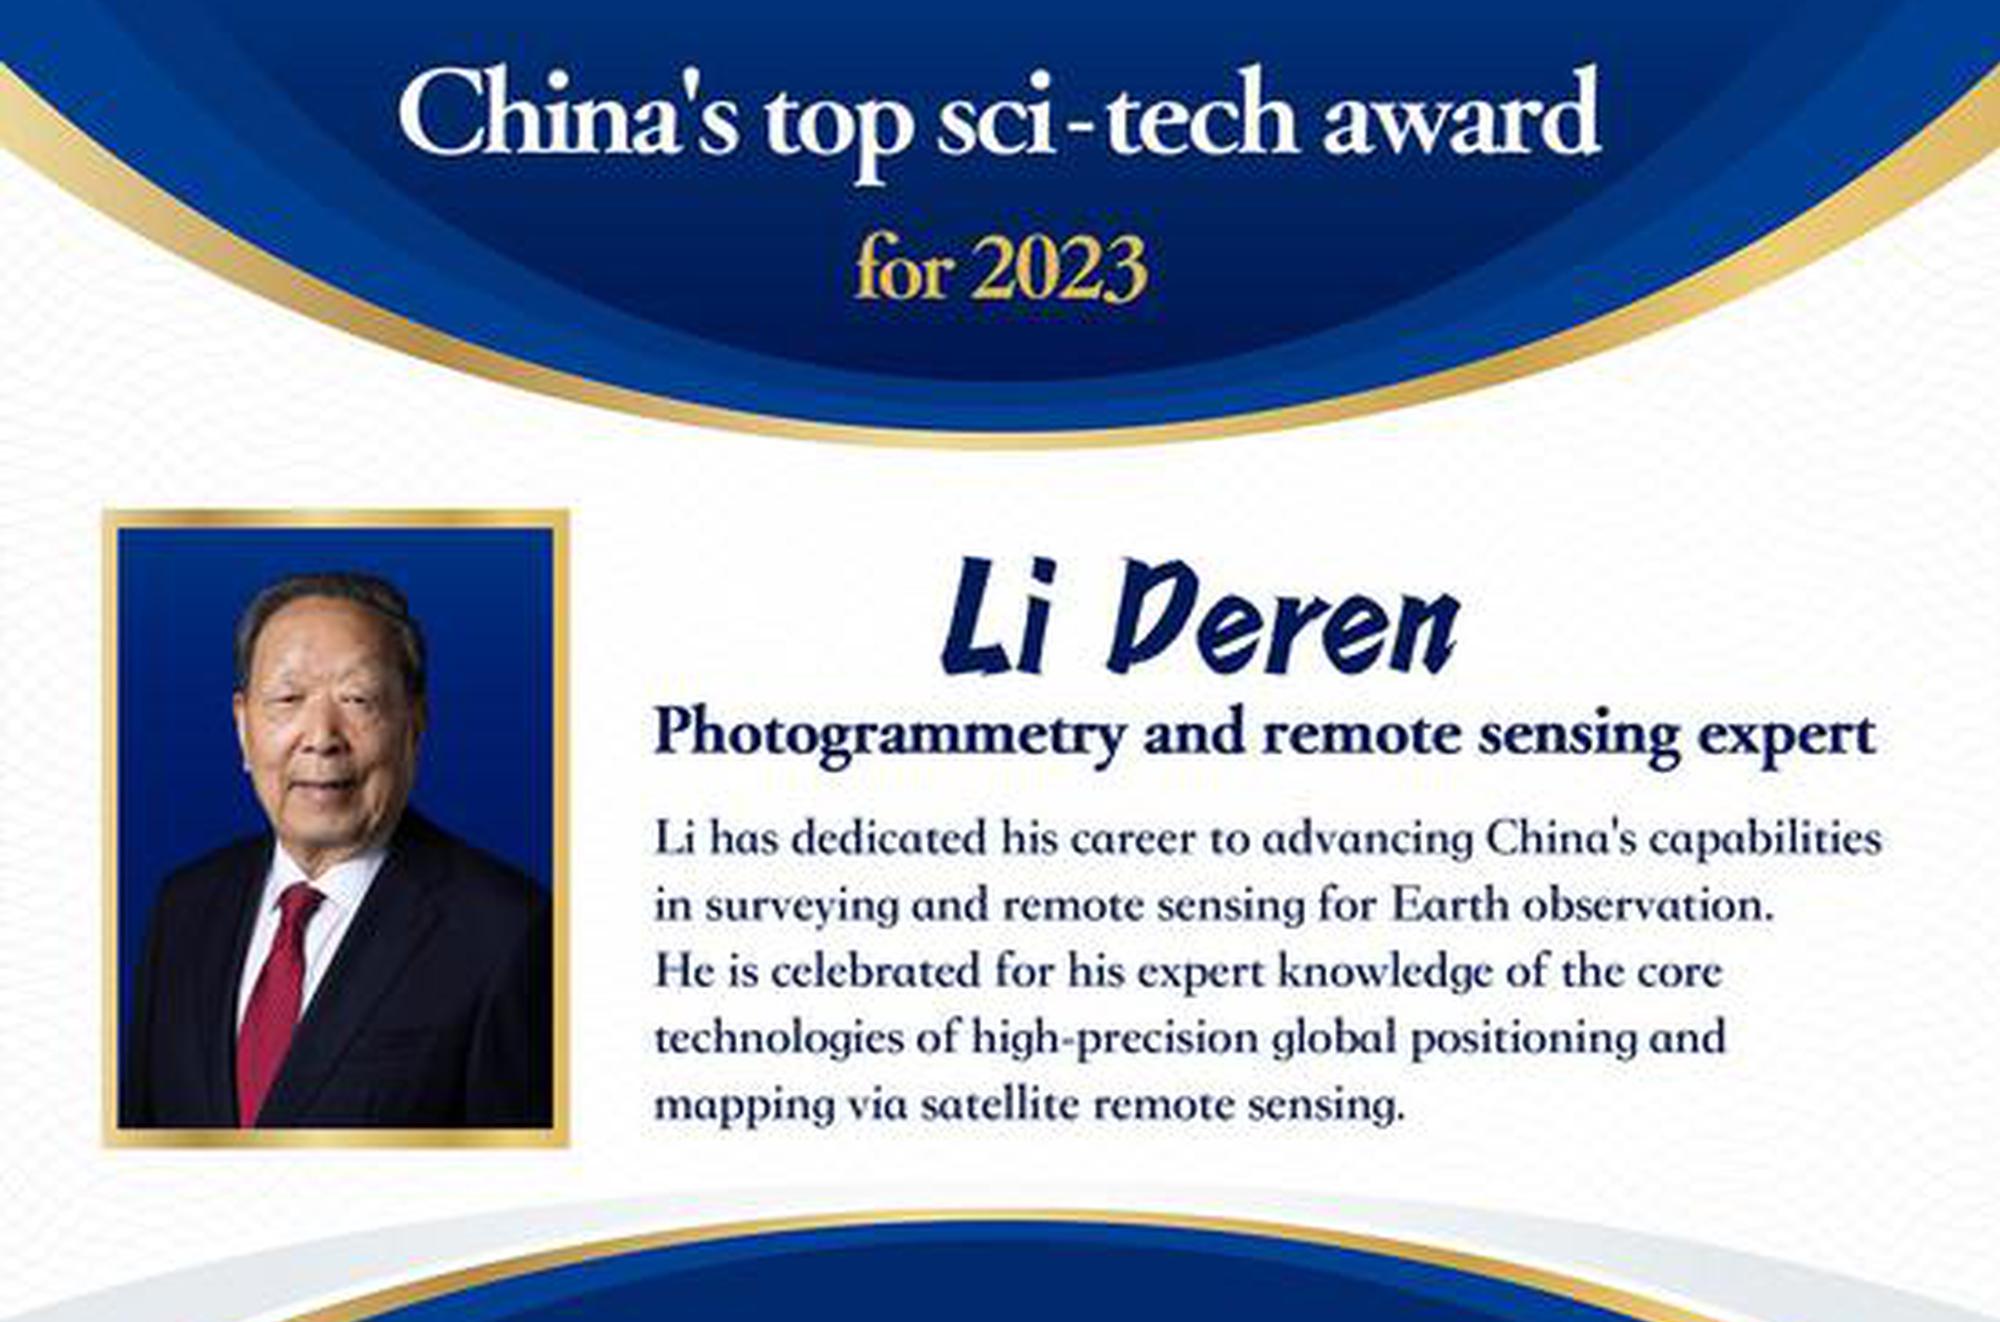 Two scientists win China's top sci-tech award for 2023